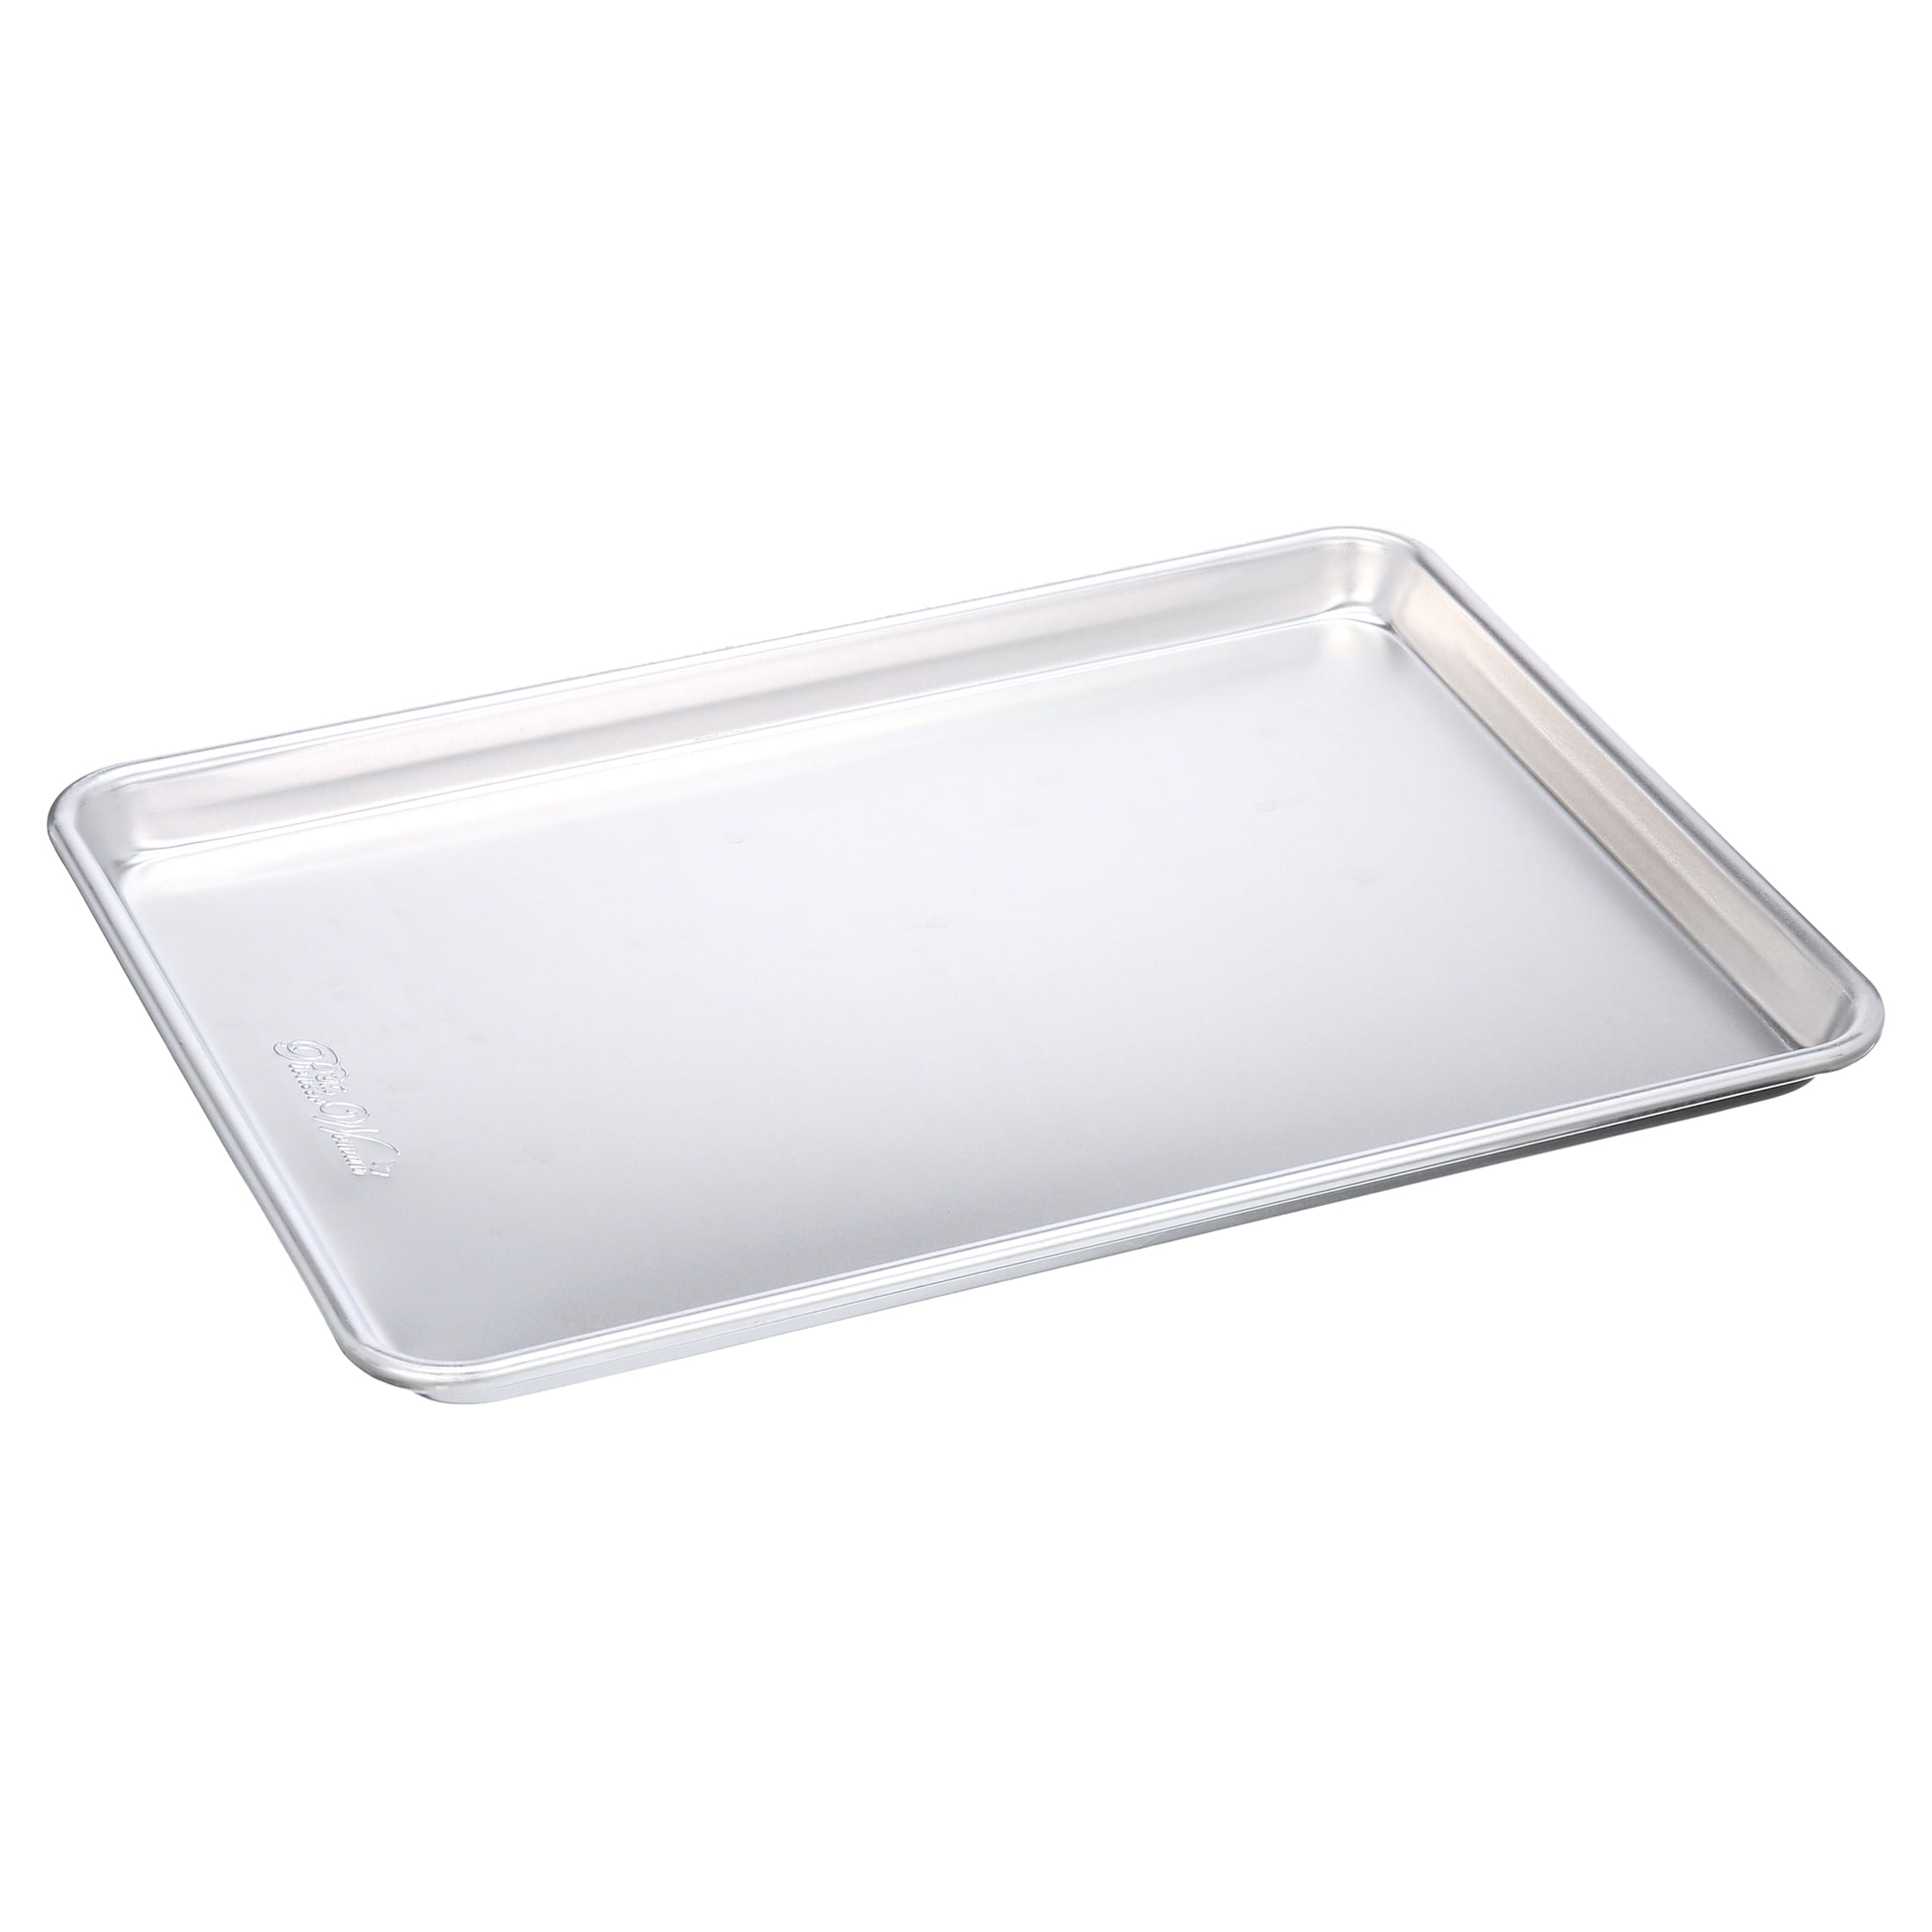 Home Basics 3-Piece Silicone Baking Sheets HDC92313 - The Home Depot